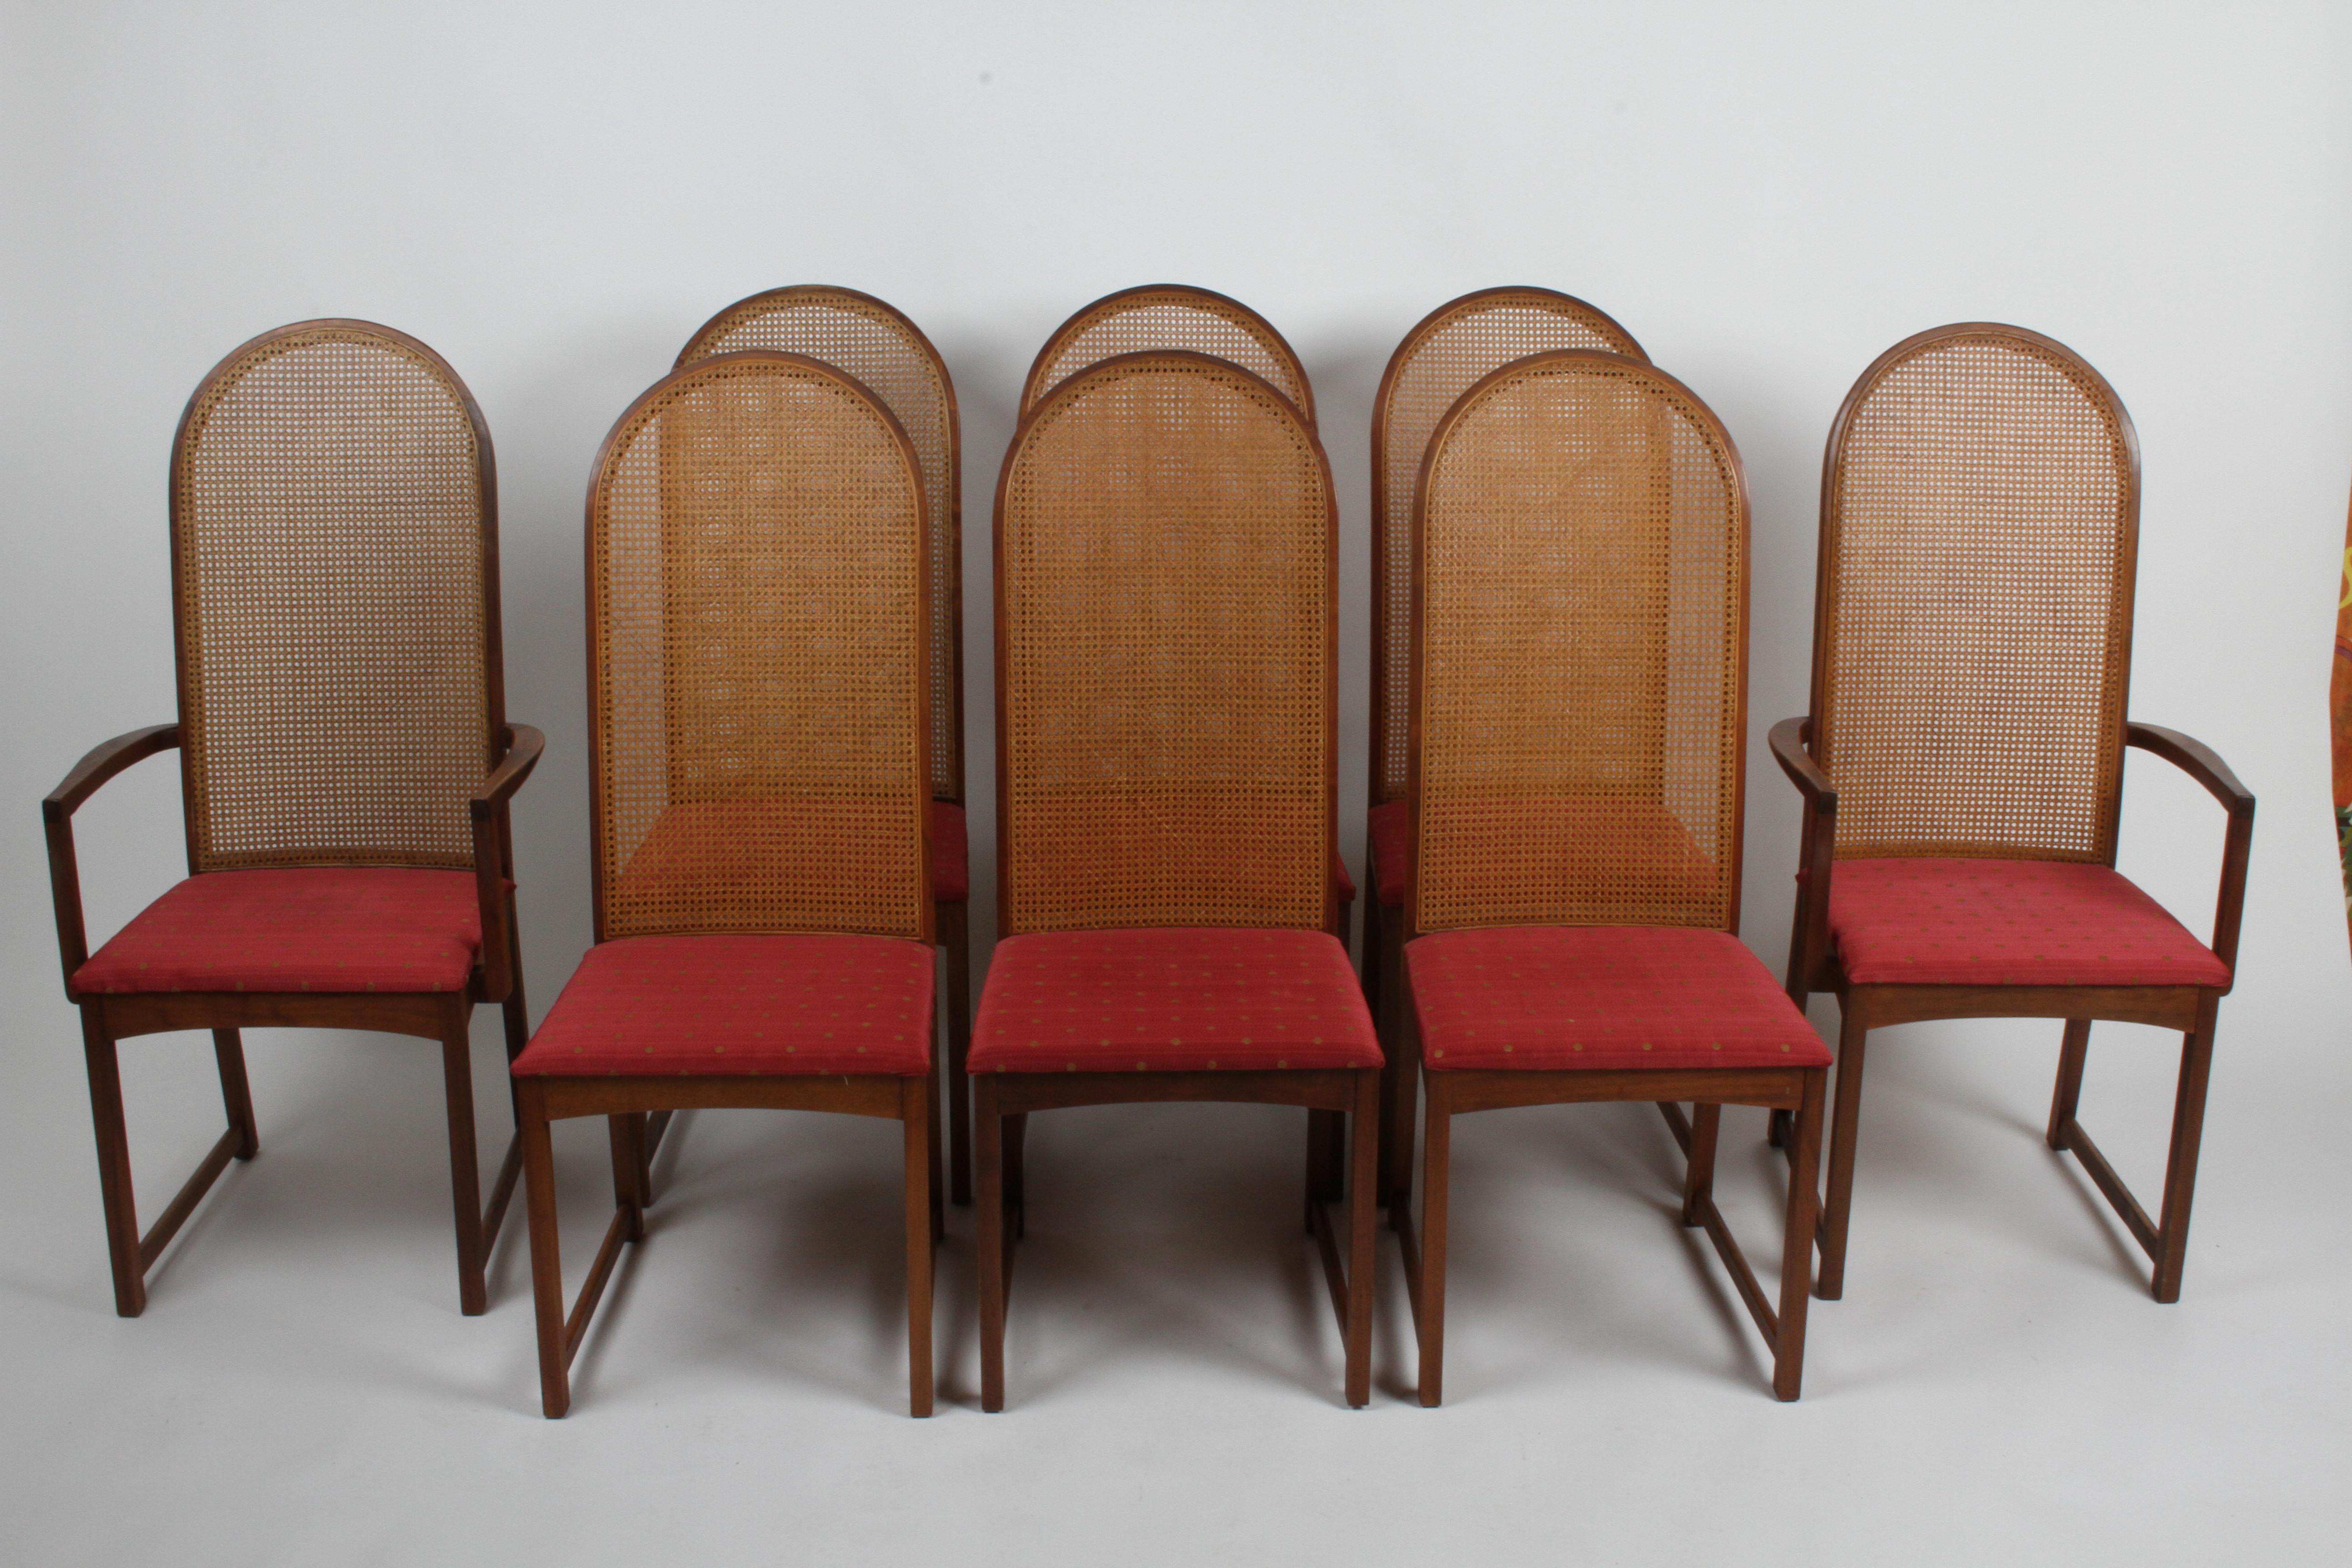 Nice all original set of 8 Mid-Century Modern walnut frame & caned high back dining chairs designed by Milo Baughman for Directional c.1960s. The set is in fine original condition, shows some wear / stains to wood. Upholstery should be updated, no